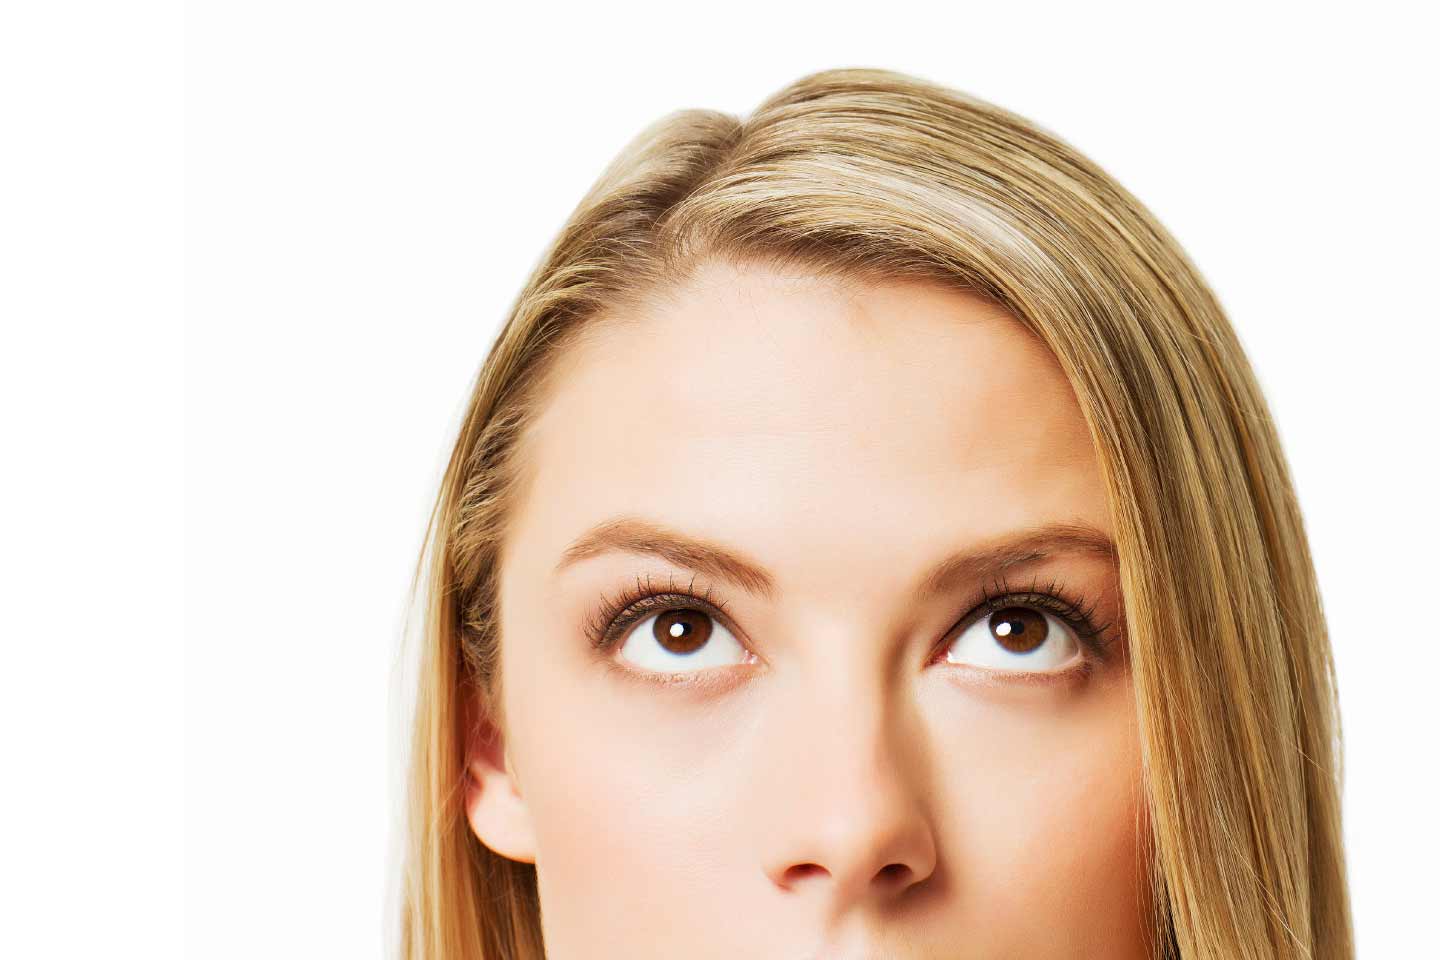 photo of the top half of a blonde woman's face